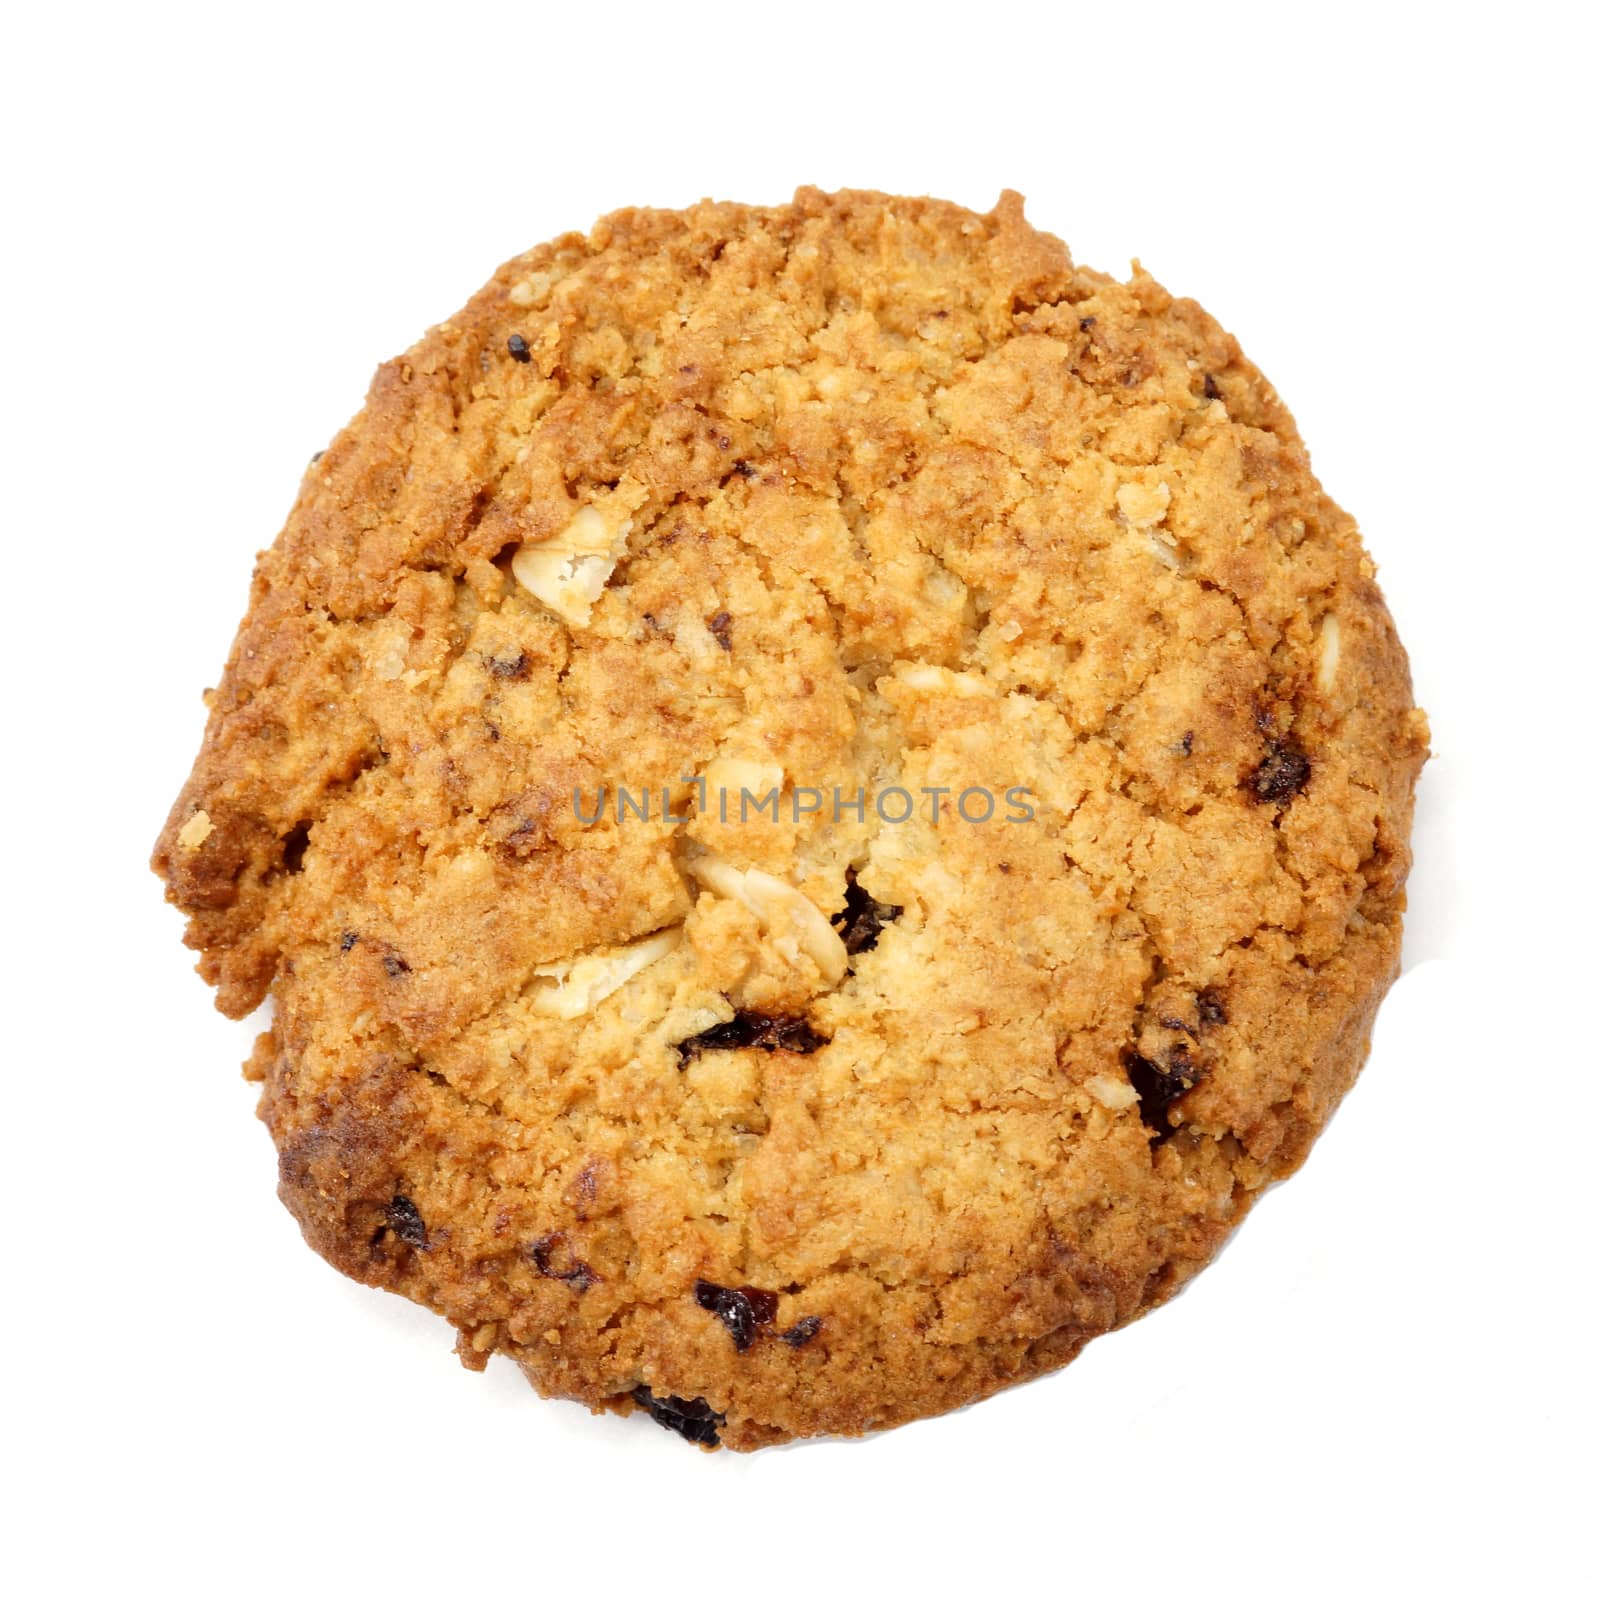 Oat cookies raisins with wholegrain oats no artificial flavors o by Noppharat_th